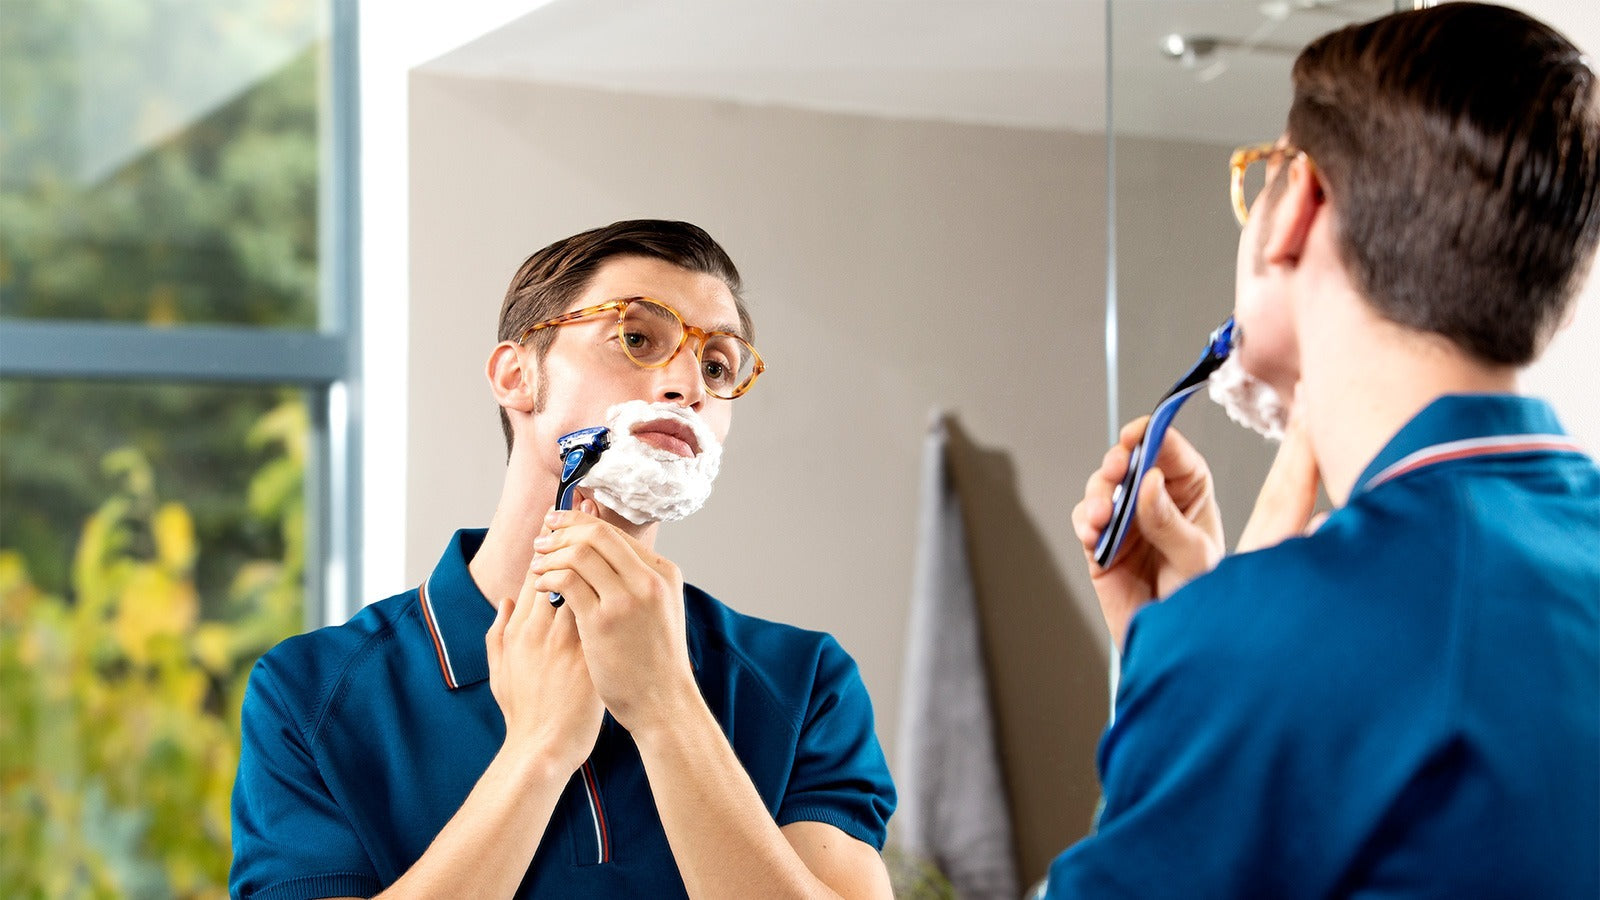 The Most Popular Male Grooming Questions You’re Too Afraid To Ask Out Loud